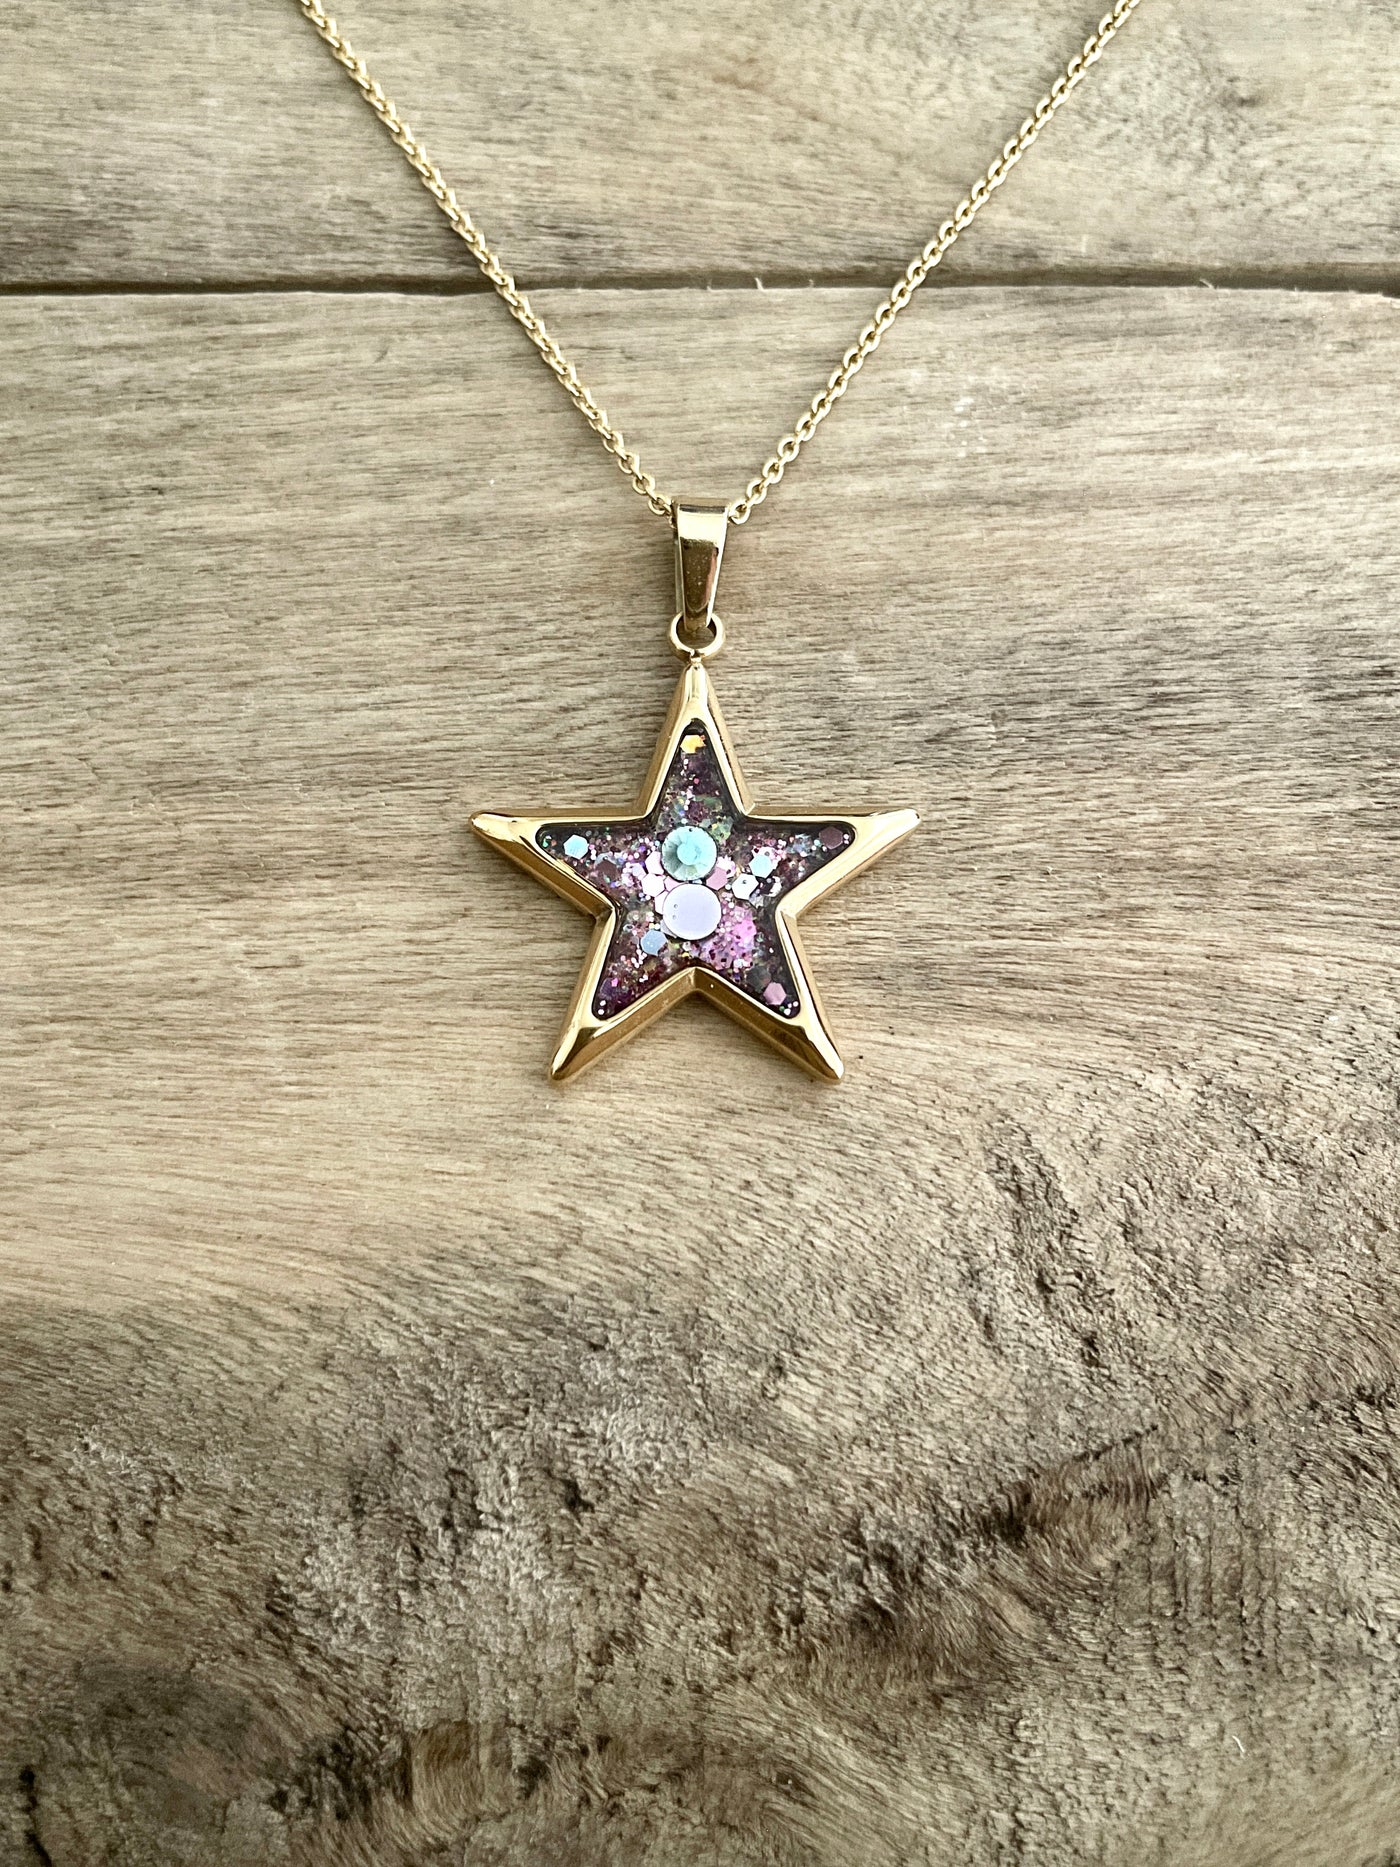 Golden star necklace Anxieties and fears